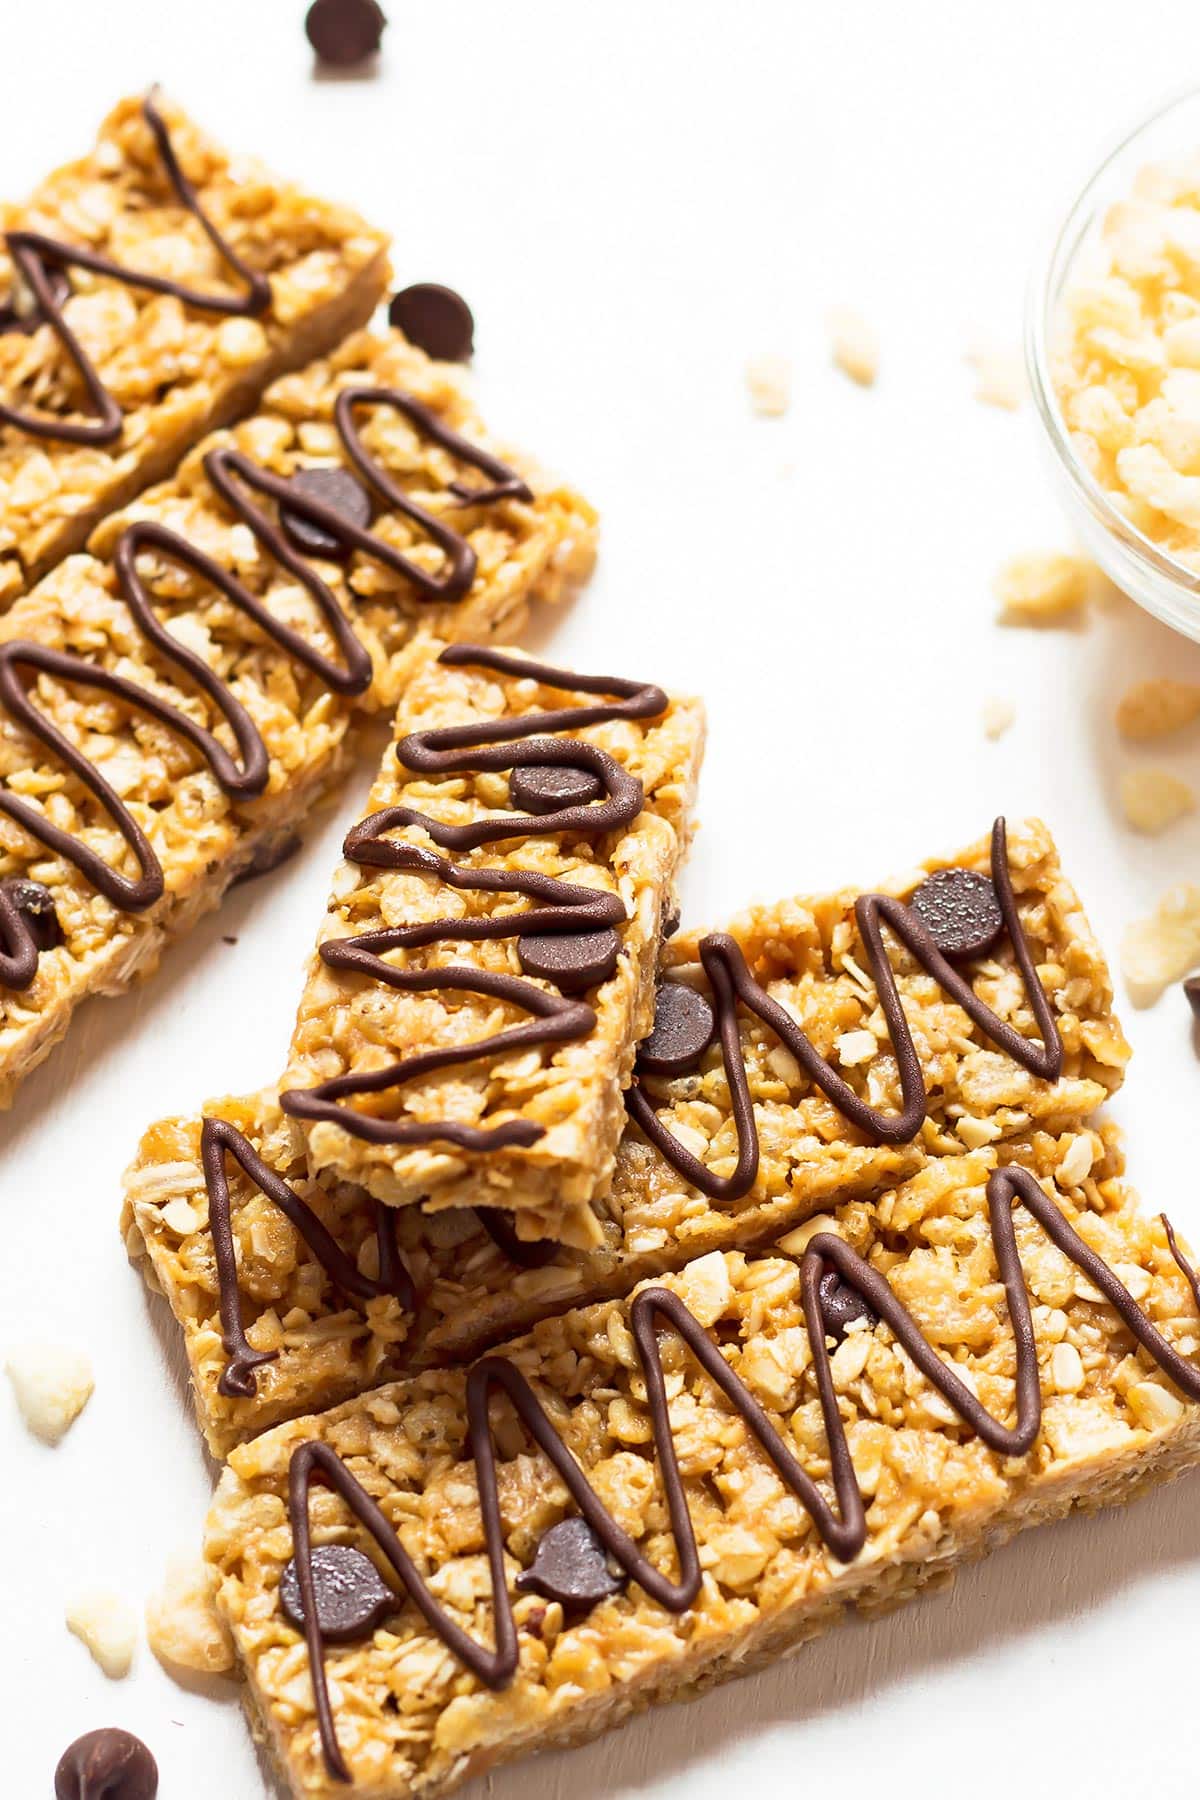 Homemade Granola Bars with chocolate drizzle and chocolate chips